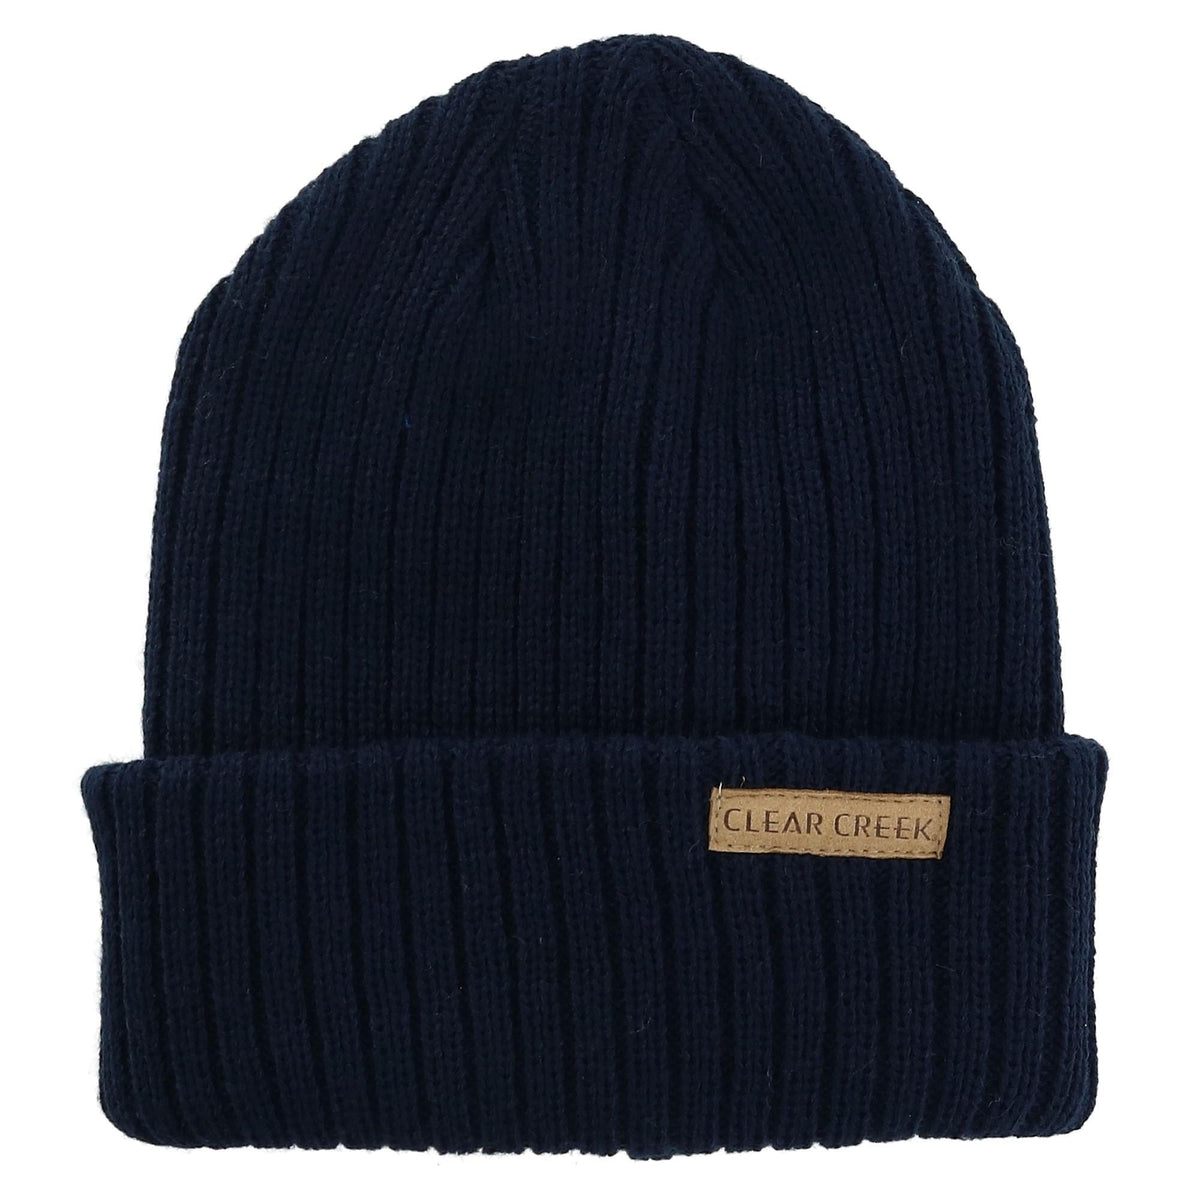 Men's Ribbed Knit Cuff Cap by Clear Creek | Beanies at BeltOutlet.com